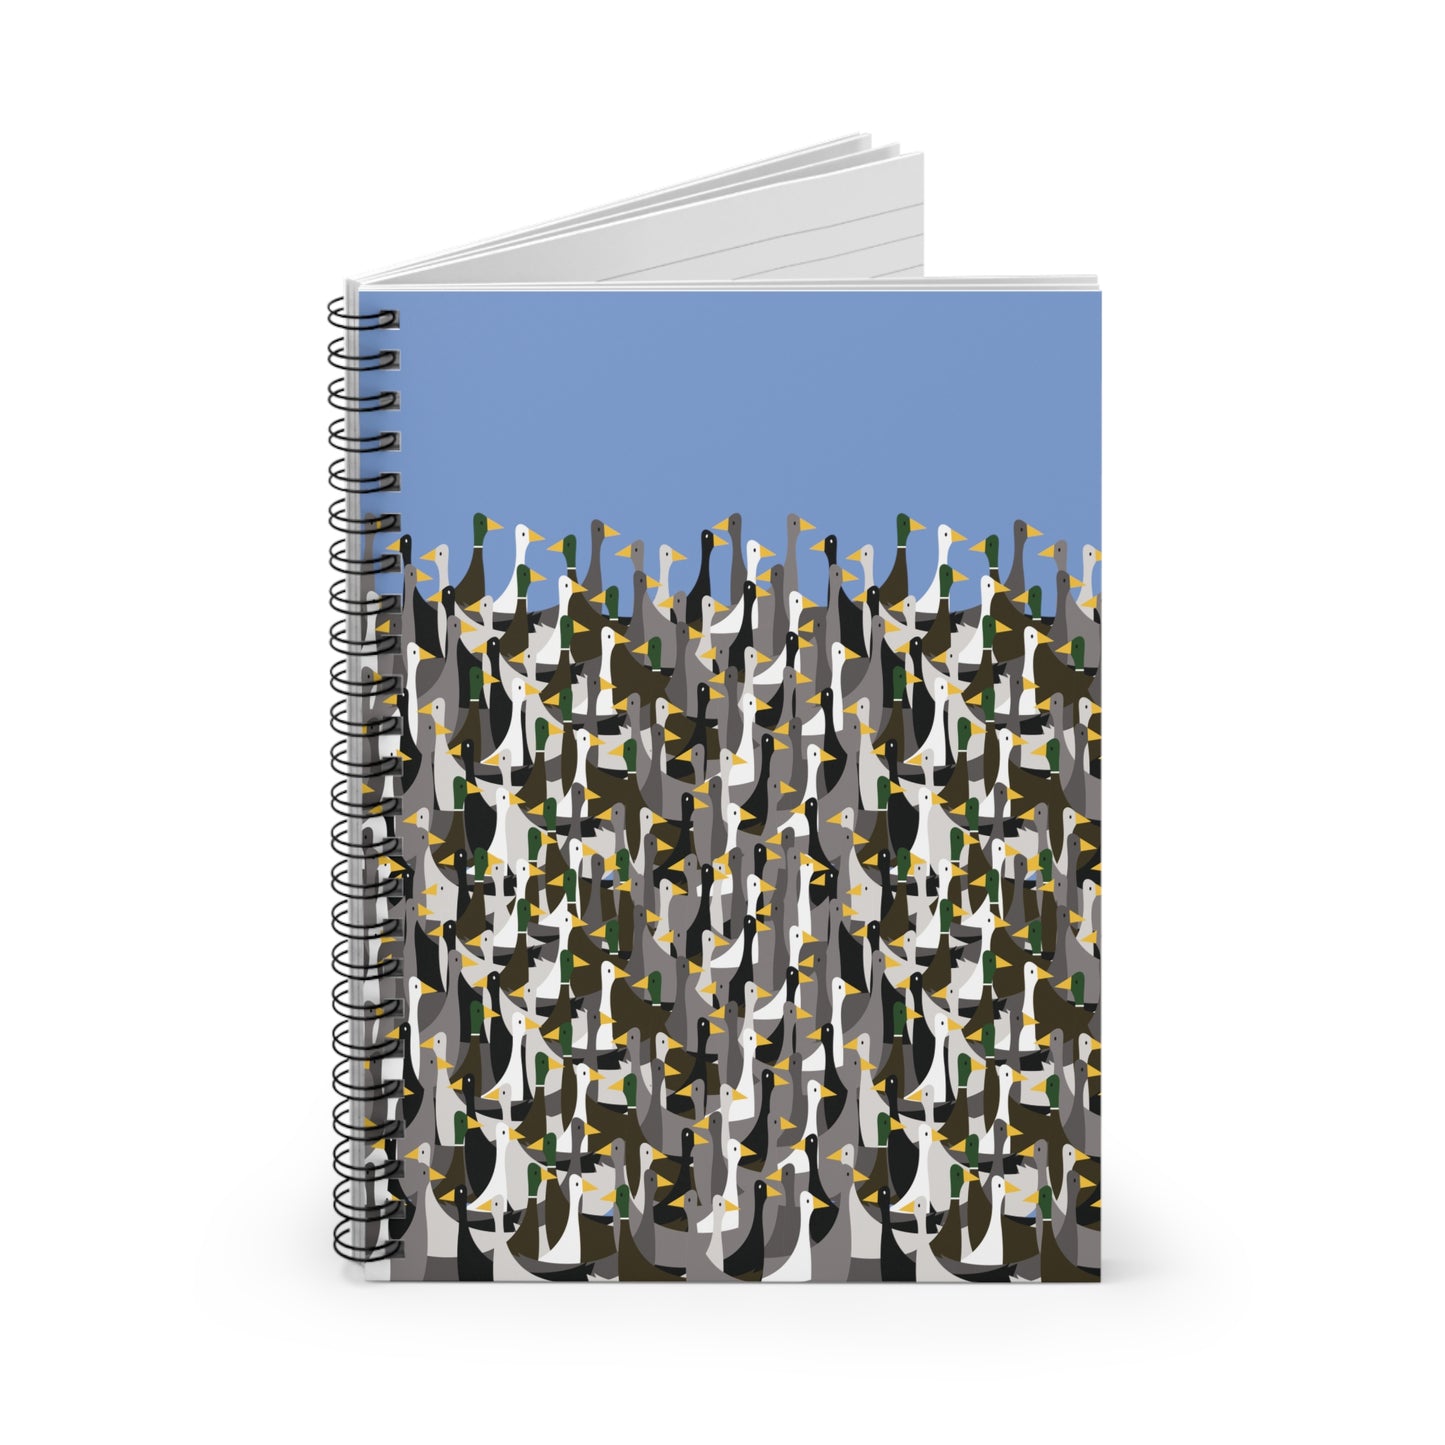 That is a LOT of ducks - Fennel Flower 74a6ff - Spiral Notebook - Ruled Line